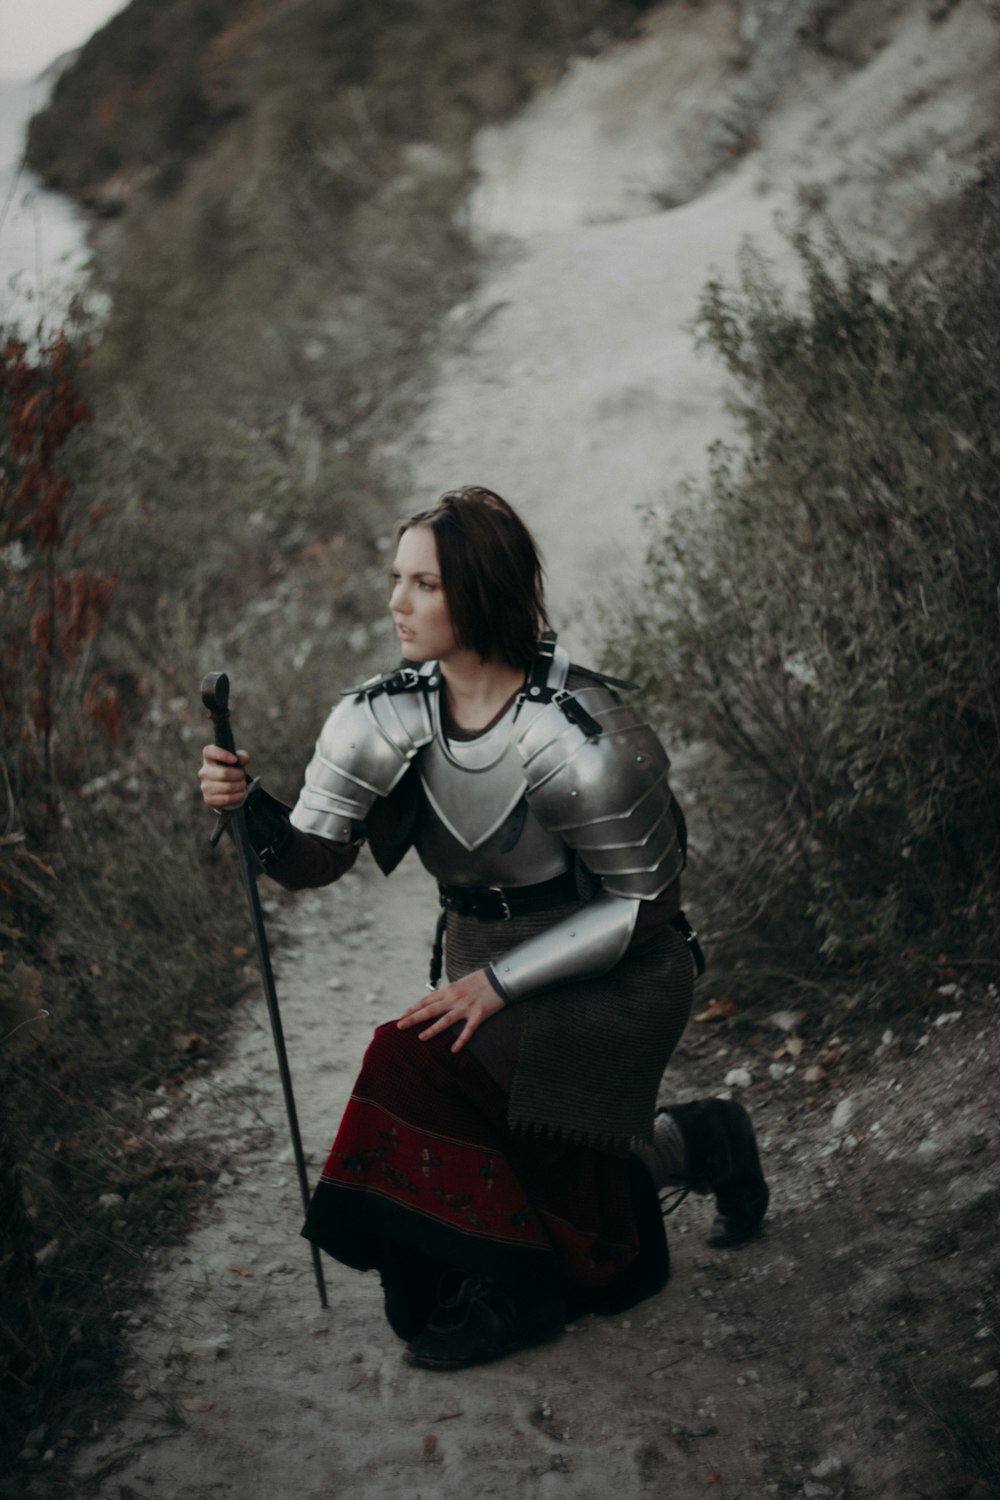 a woman dressed as a knight kneeling on a path